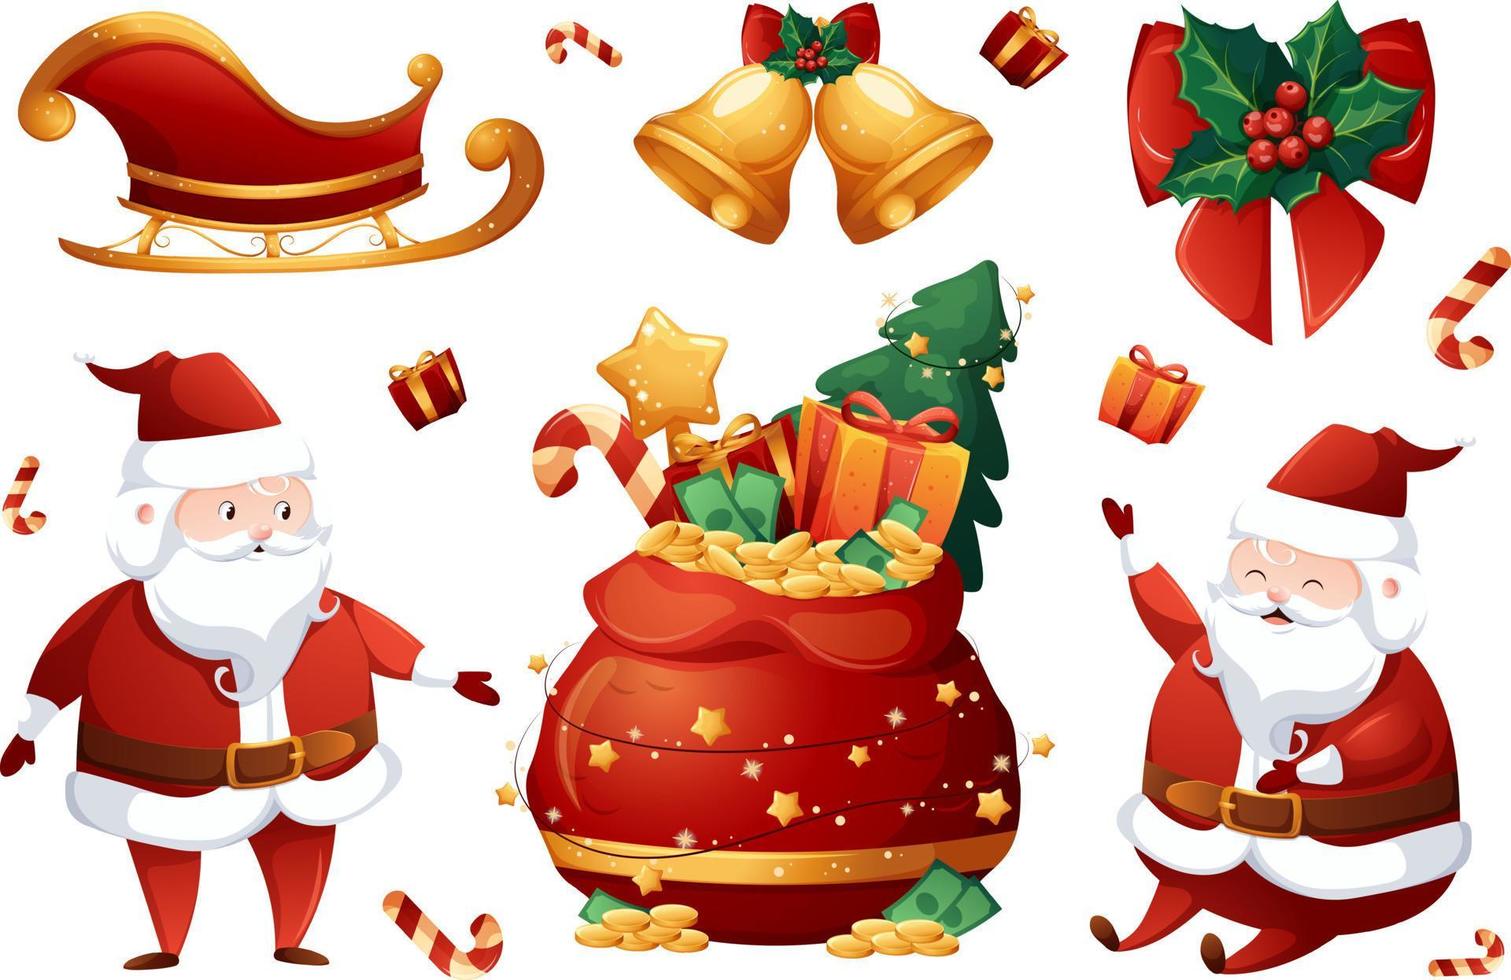 Set of Christmas Gift items with Santa Claus bag, holly, sleigh and golden bells vector